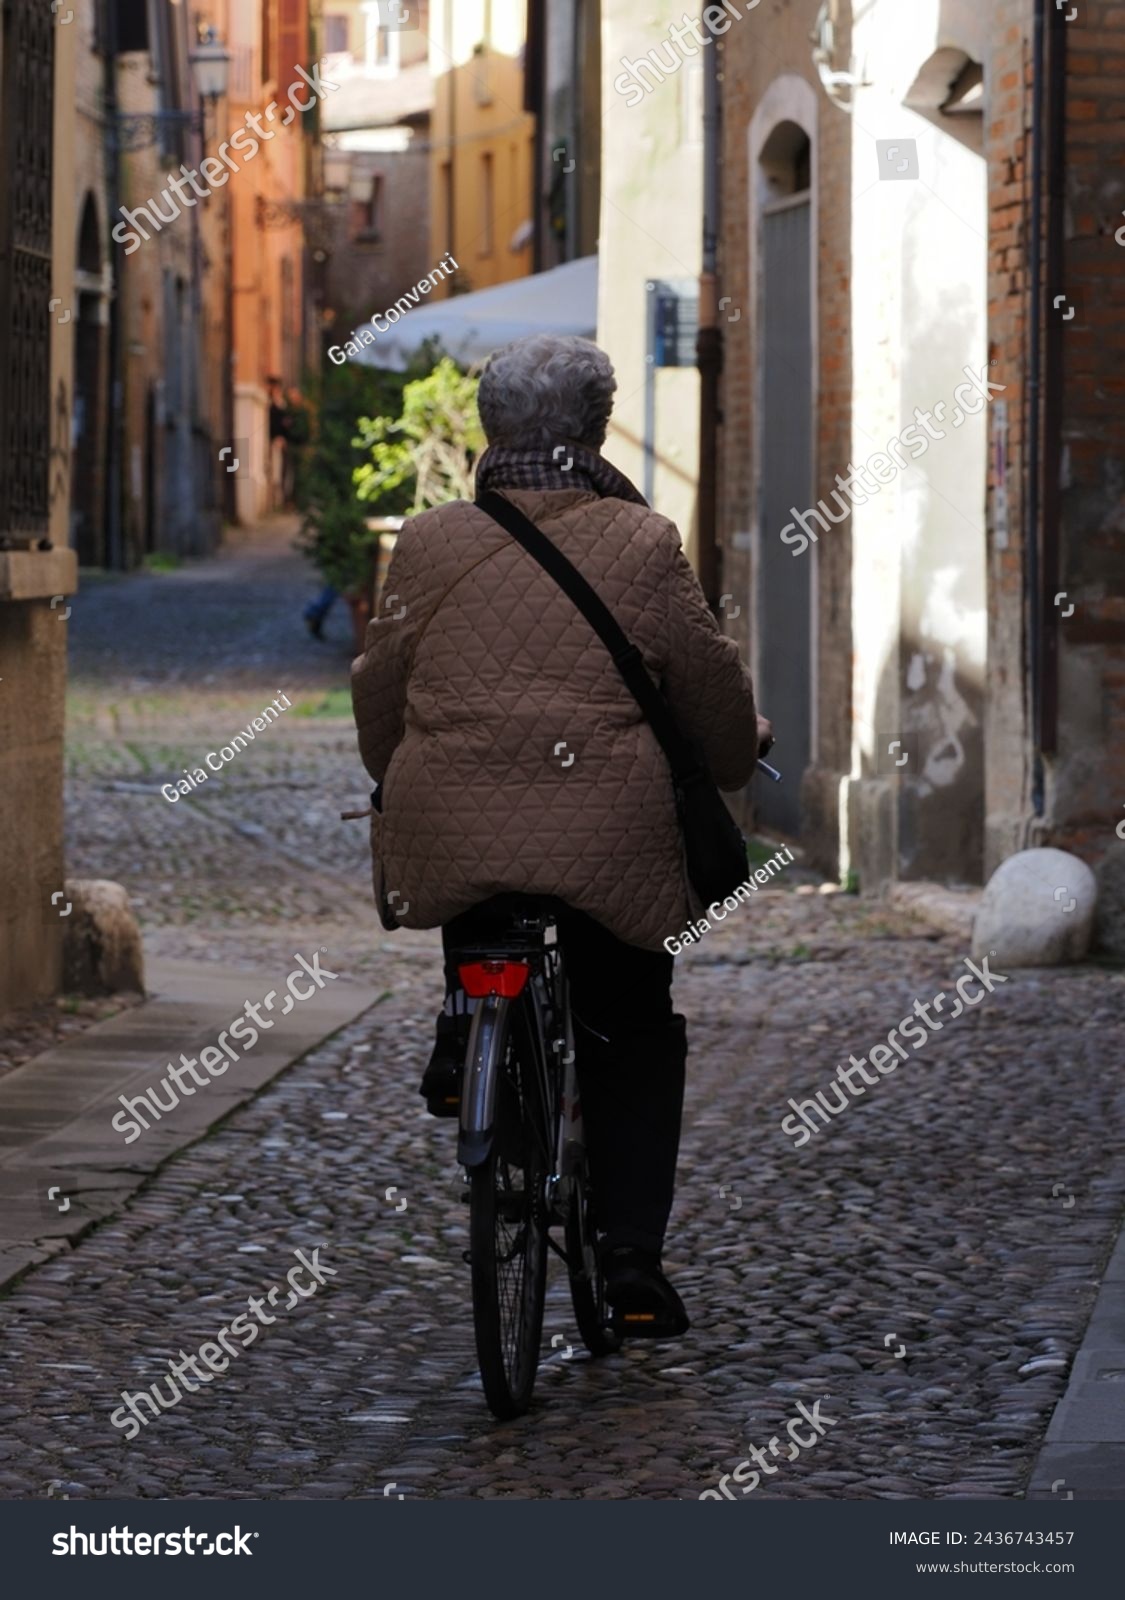 Ferrara, Italy. Elderly woman on a bicycle in a narrow alley in the historic center. #2436743457